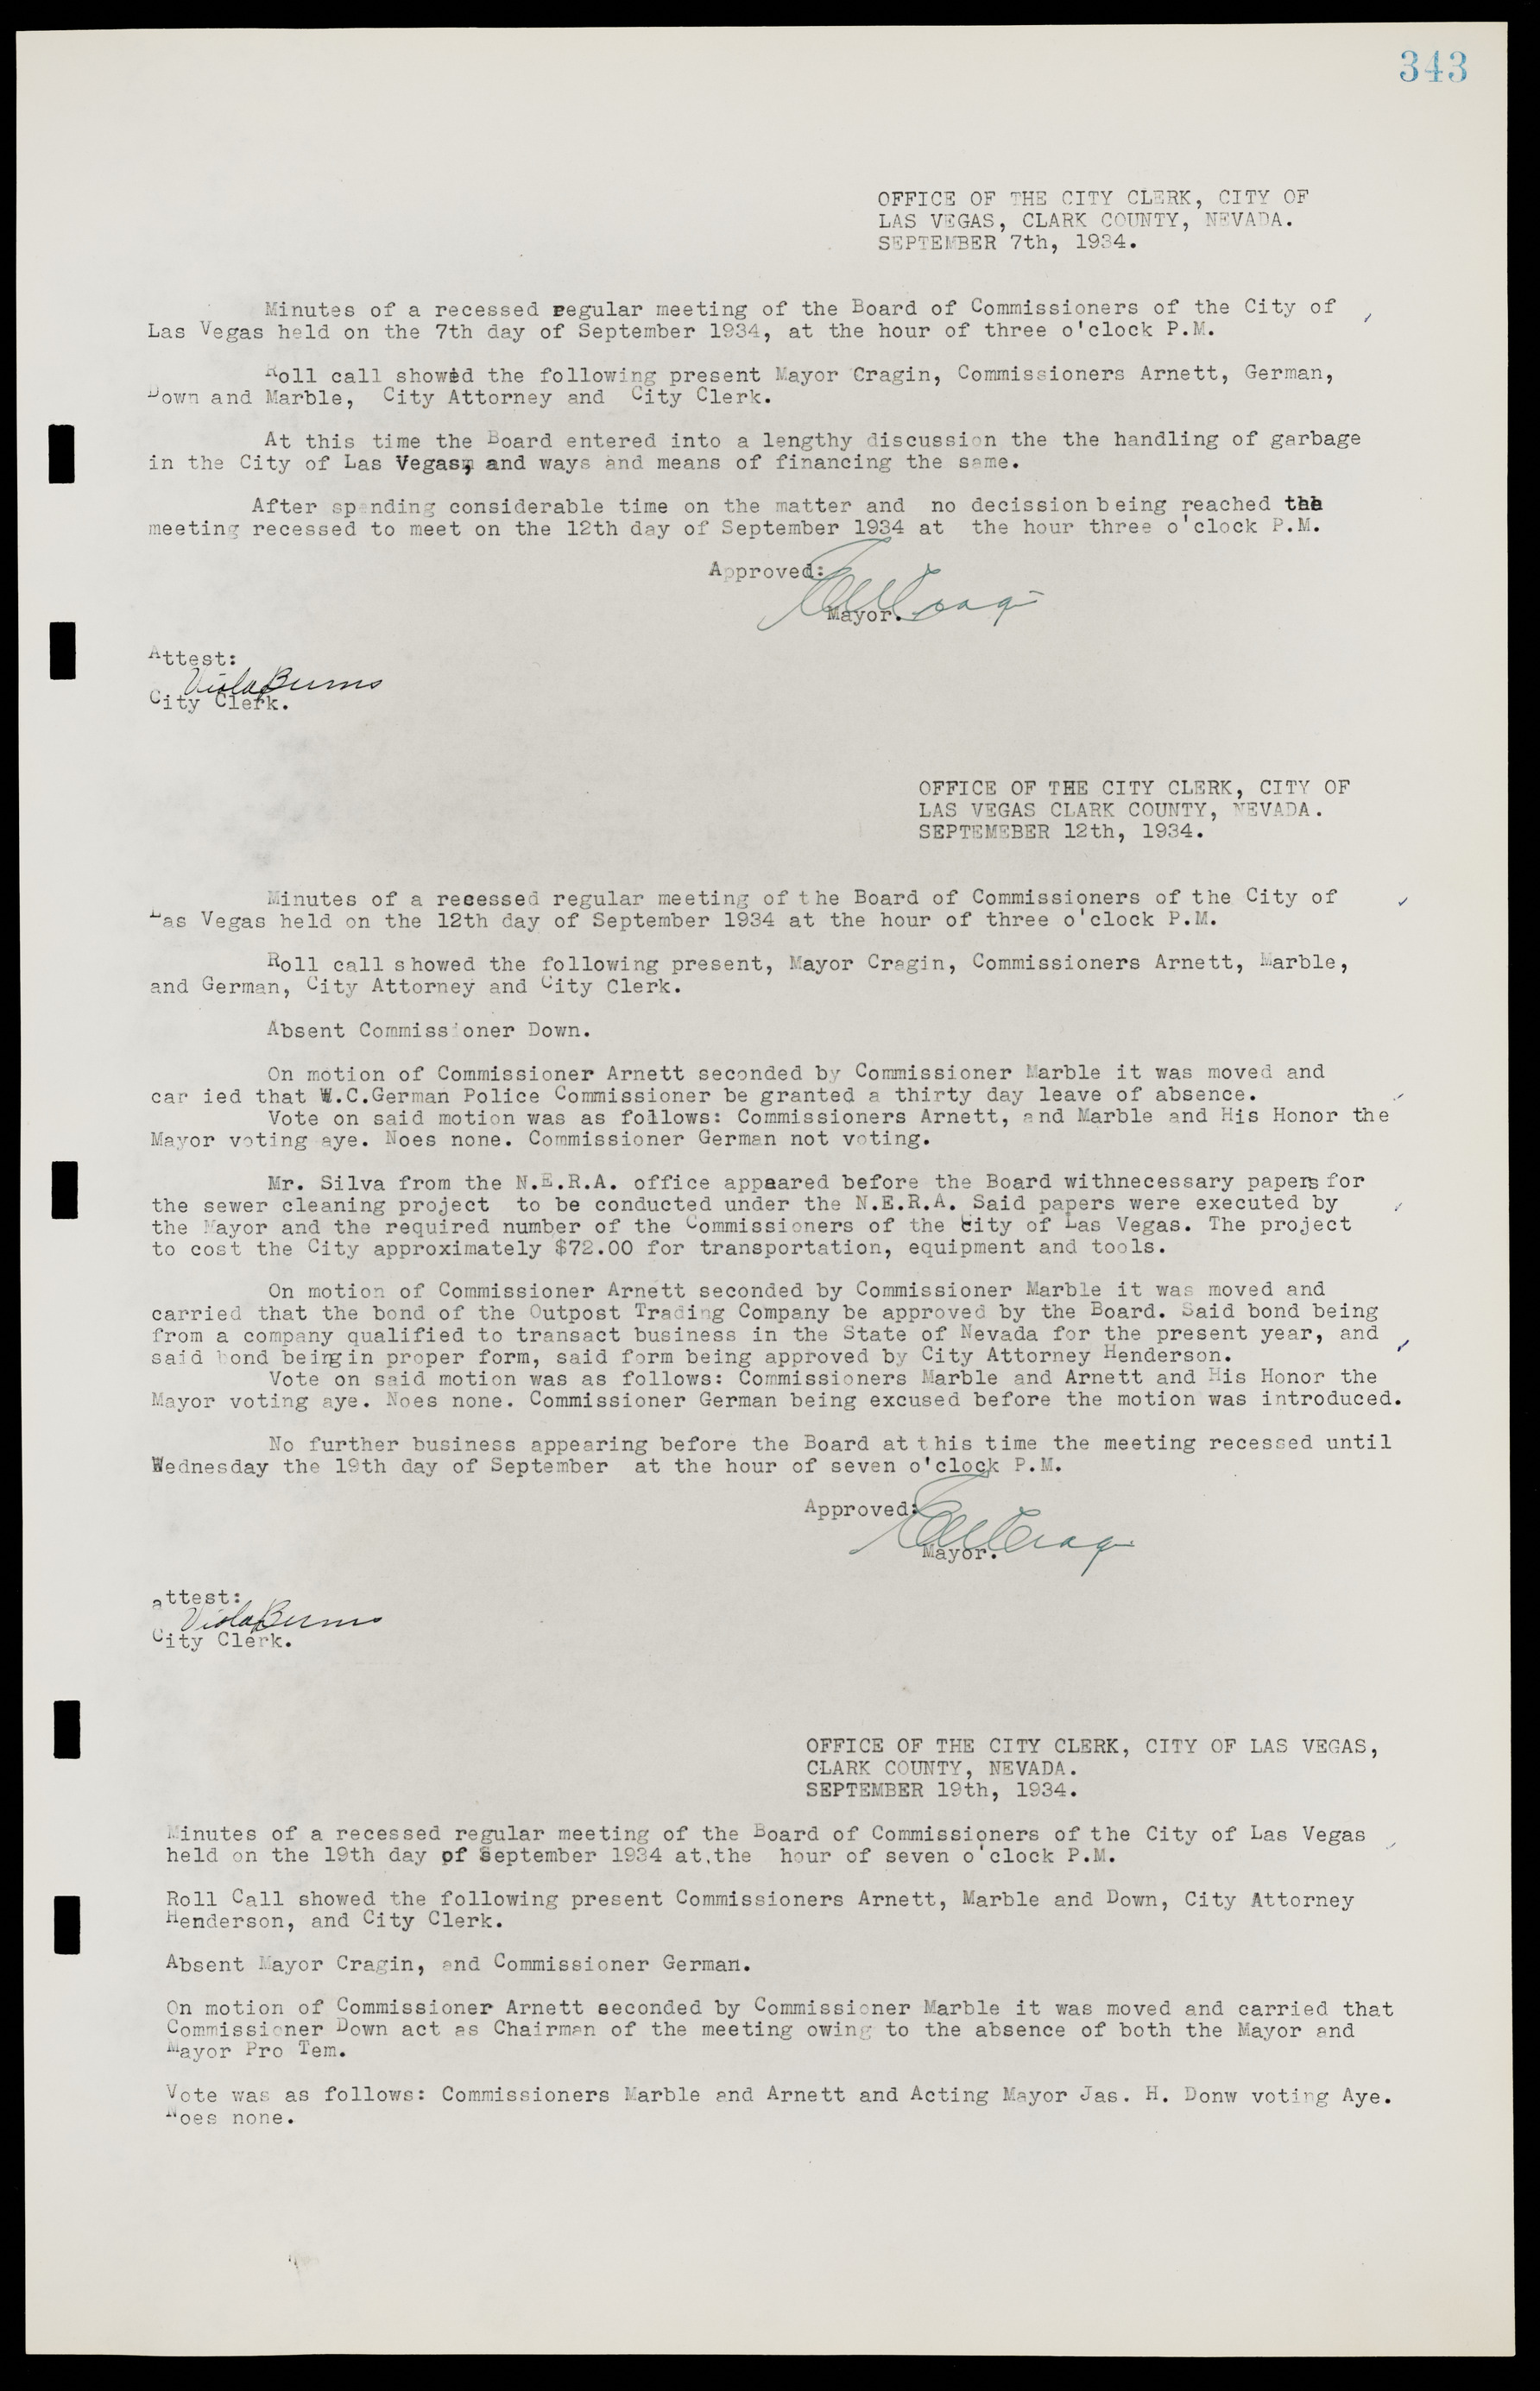 Las Vegas City Commission Minutes, May 14, 1929 to February 11, 1937, lvc000003-350